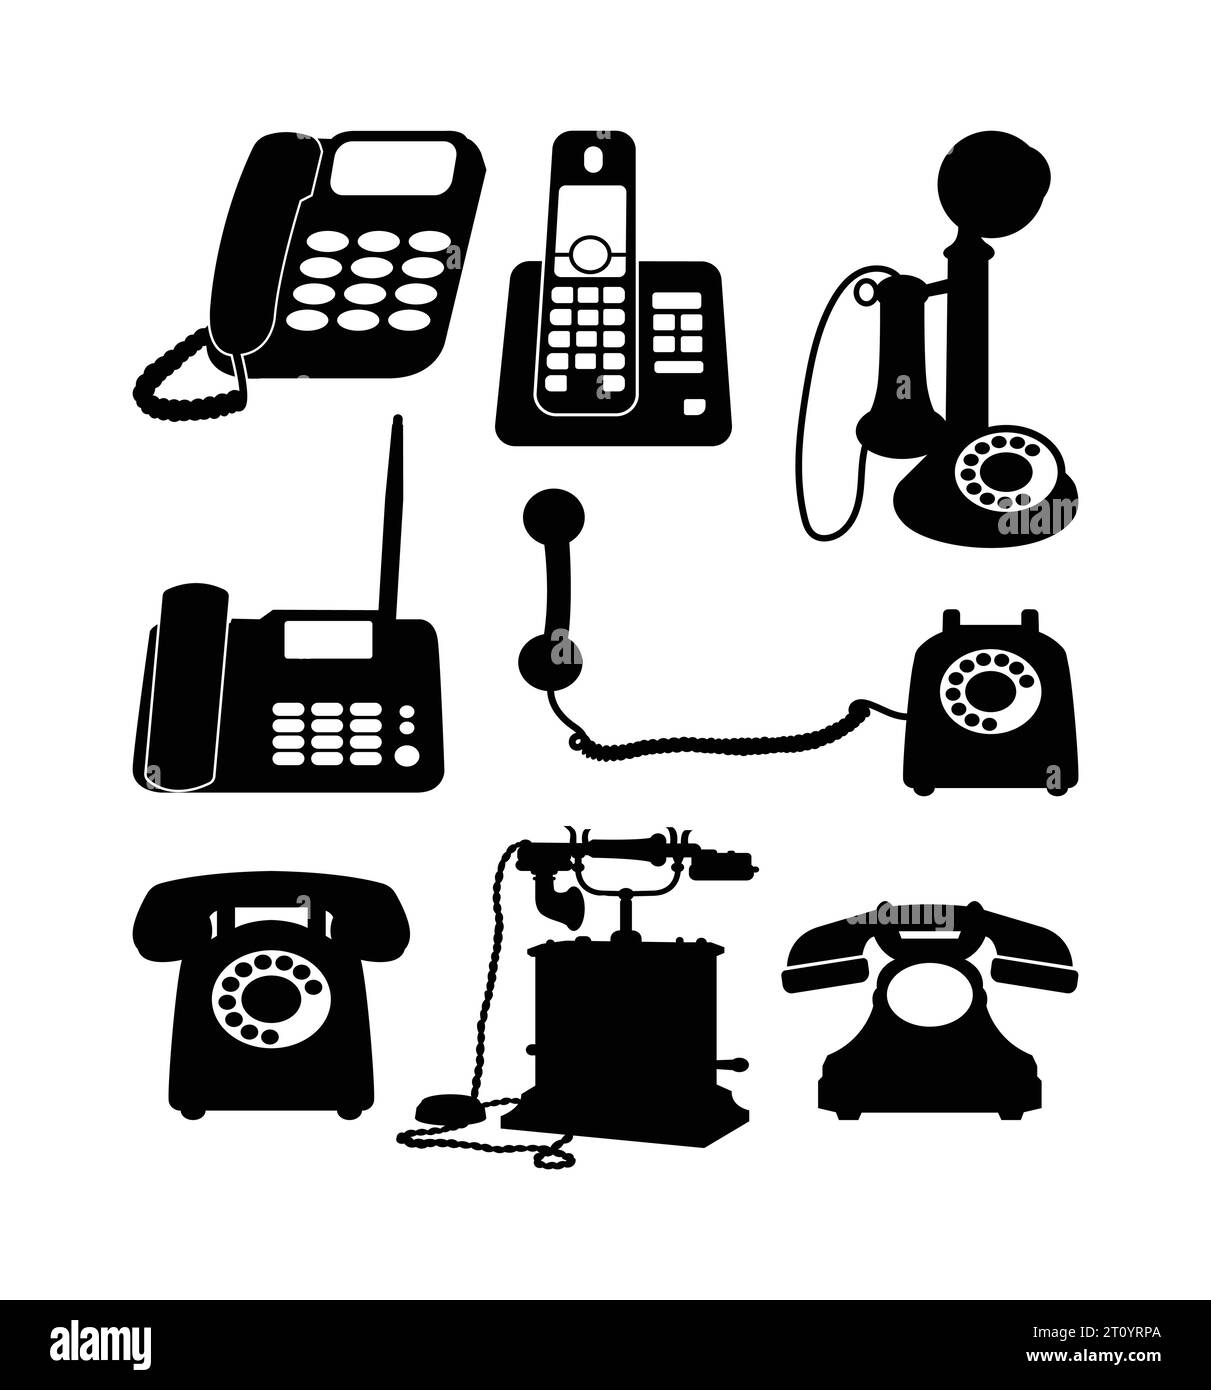 Telephone telecommunication tool object silhouette Stock Vector